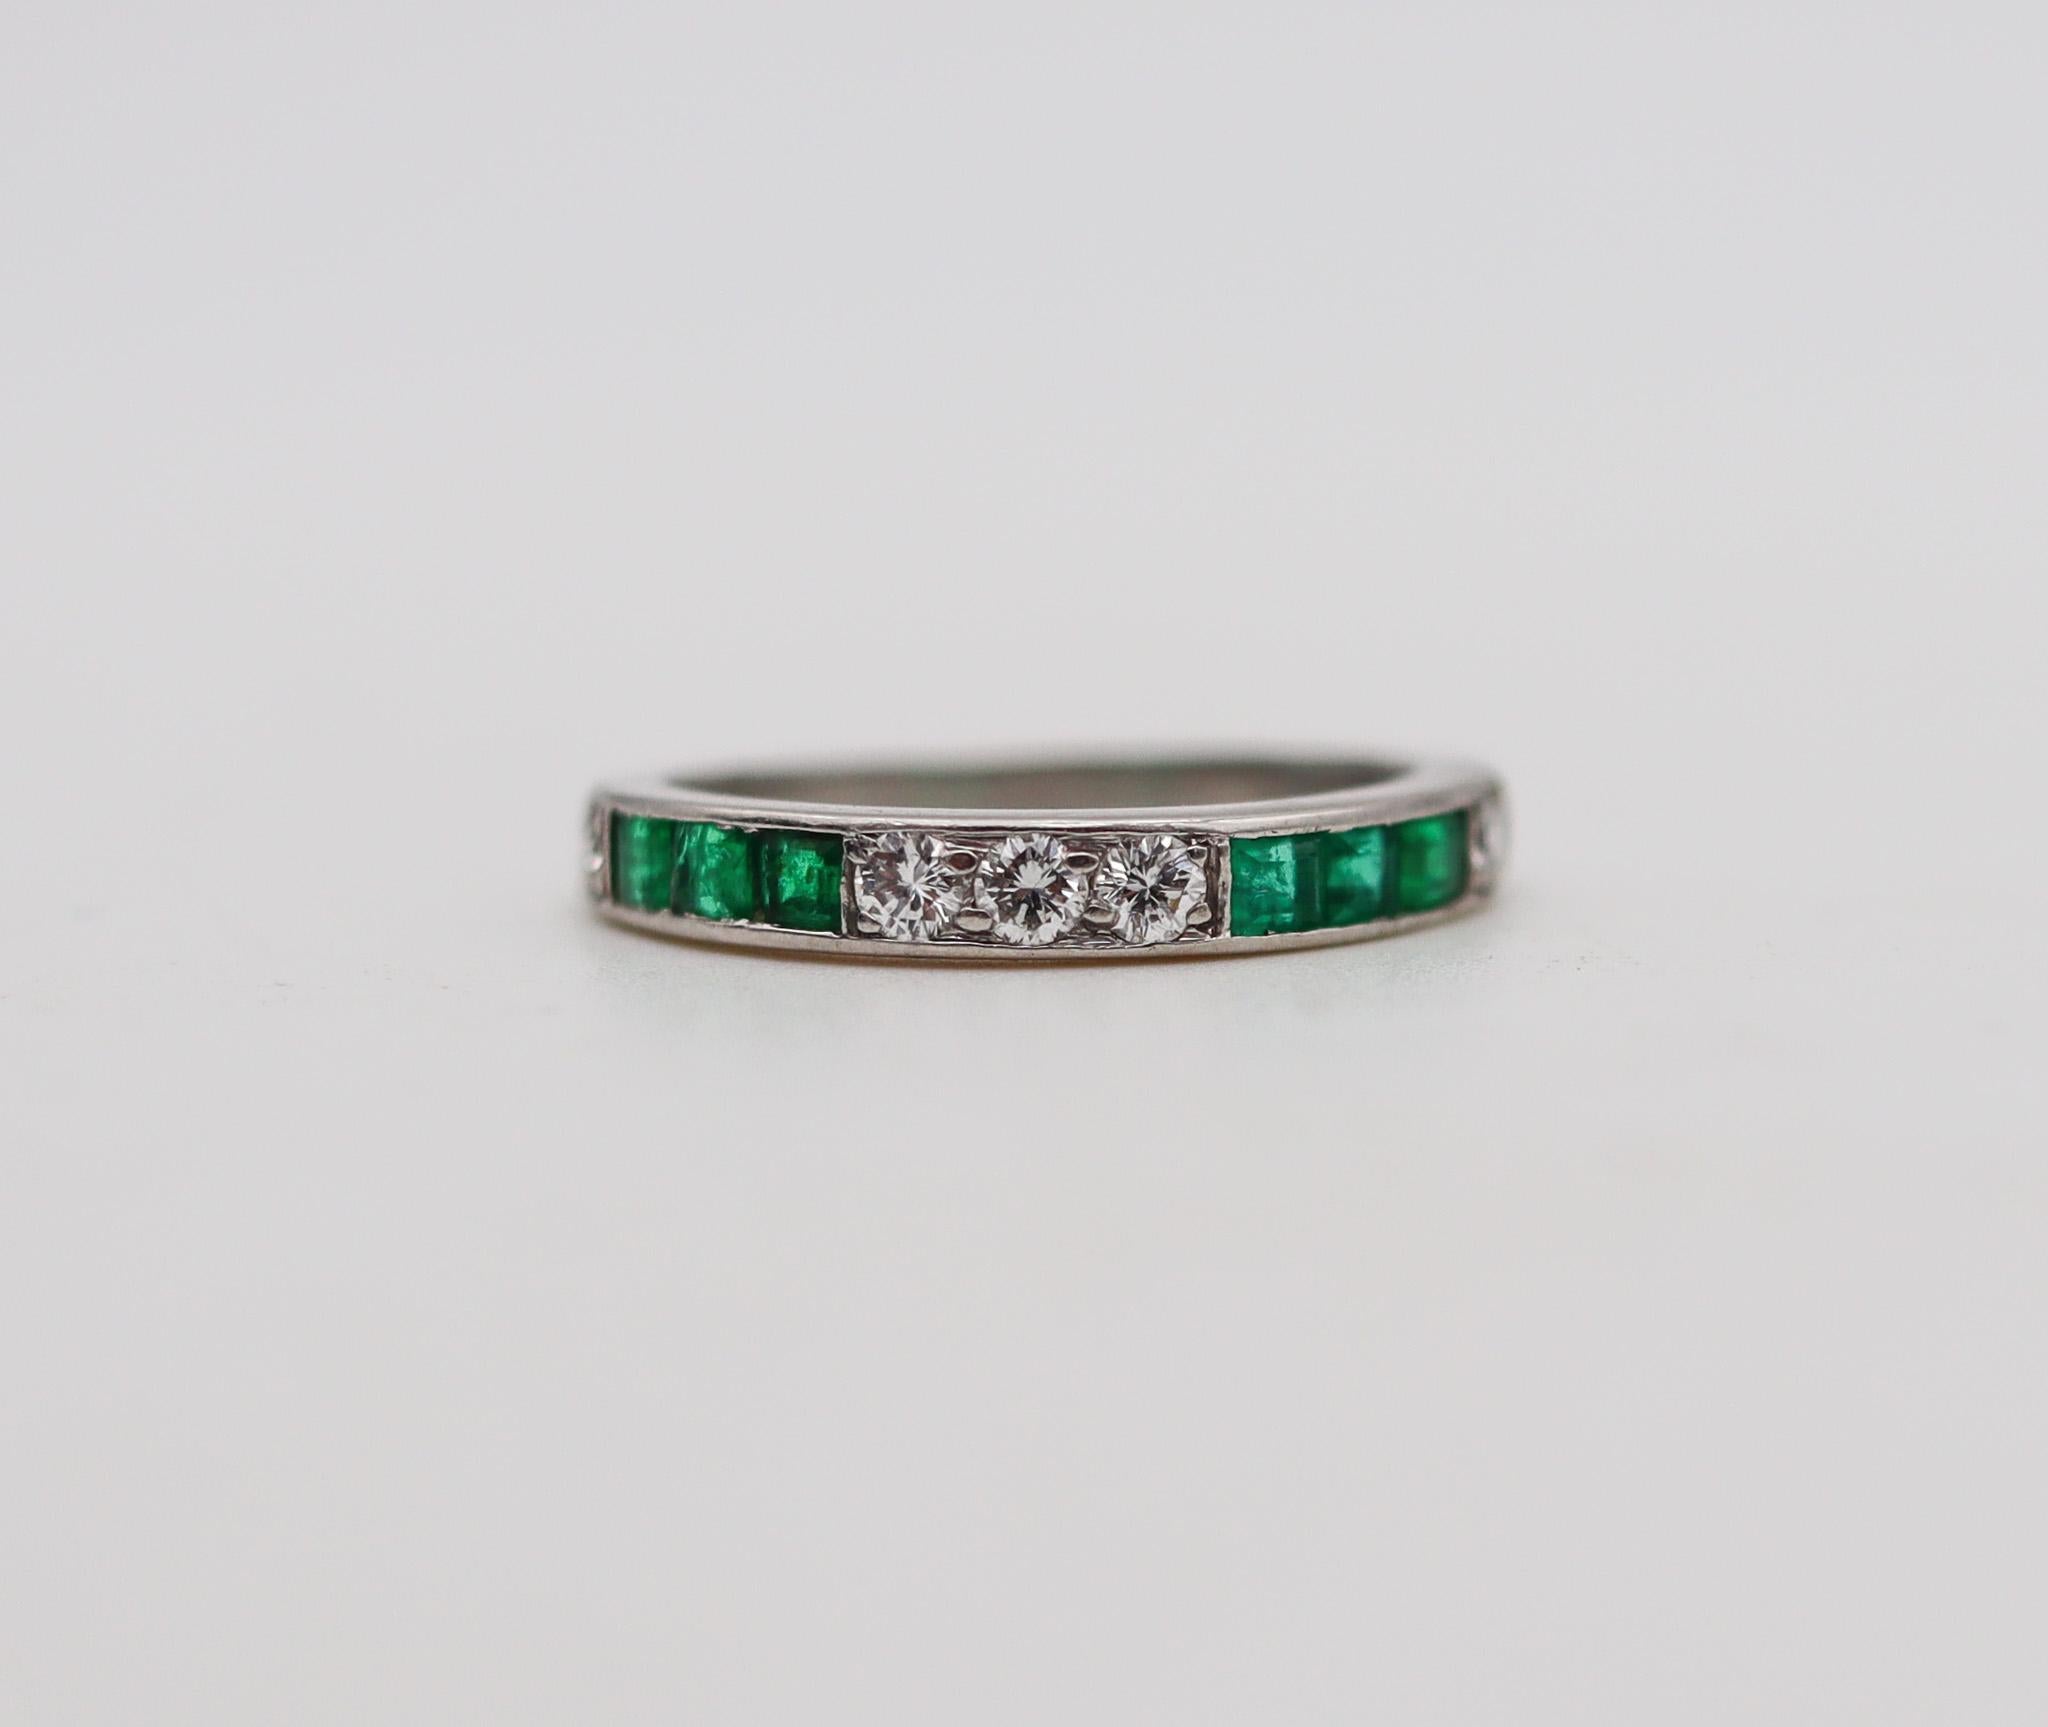 Eternity ring band with natural Gemstones.

A beautiful and colorful half eternity band ring created during the American art deco period, back in 1930. This elegant ring has been crafted in solid .900/.999 platinum with high polished finish and